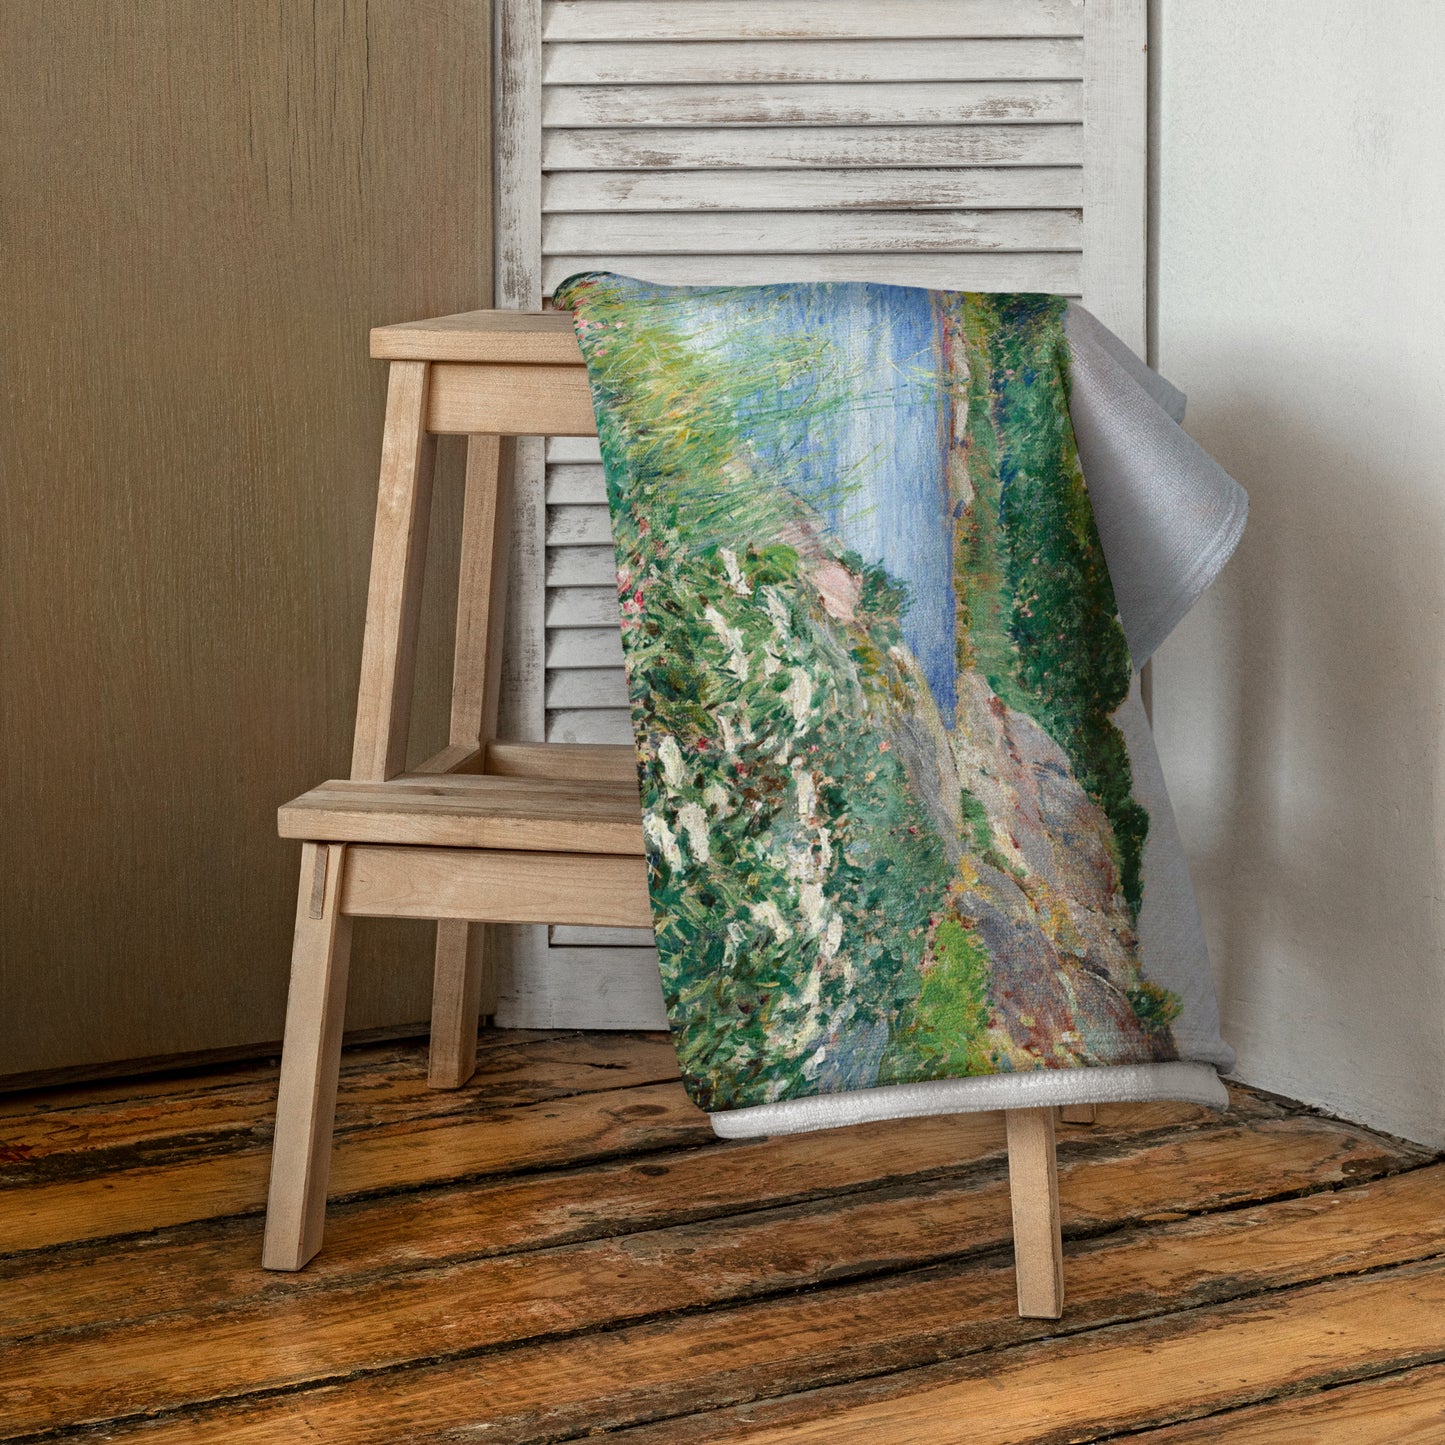 Beach towel featuring painting 'The little pond, Appledore' by Frederick Childe Hassam, hanging over a chair in a room